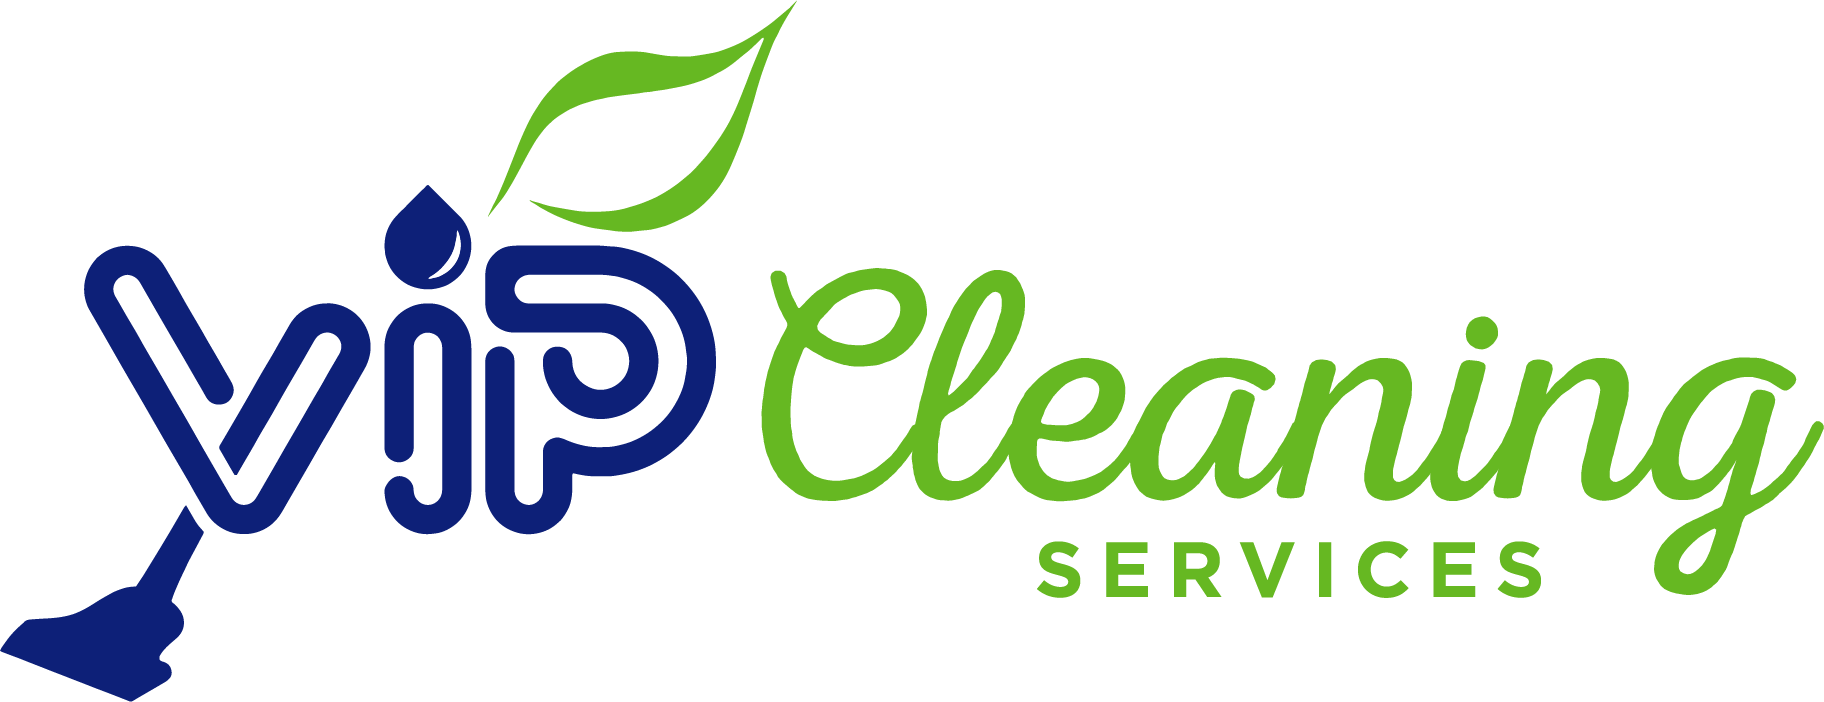 VIP cleaning logo